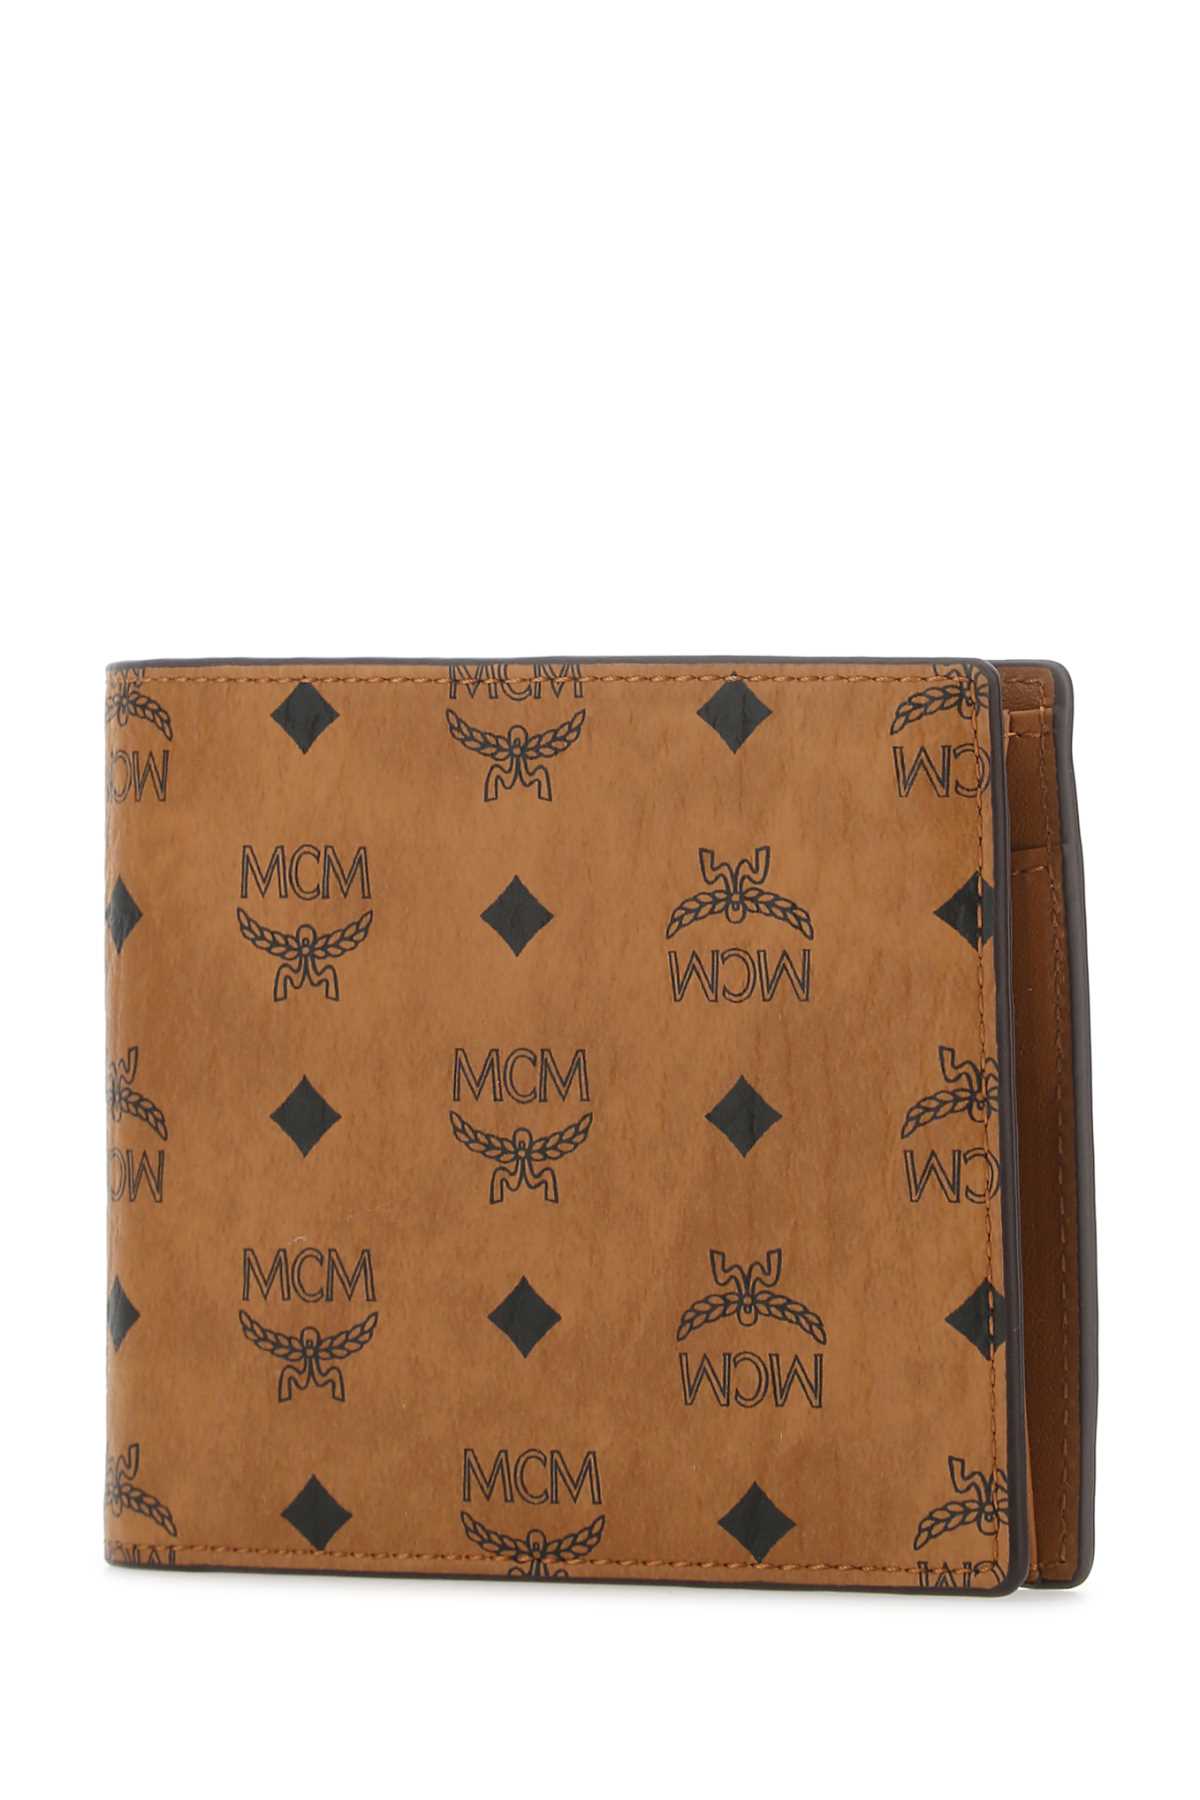 Mcm Printed Canvas Wallet In Co